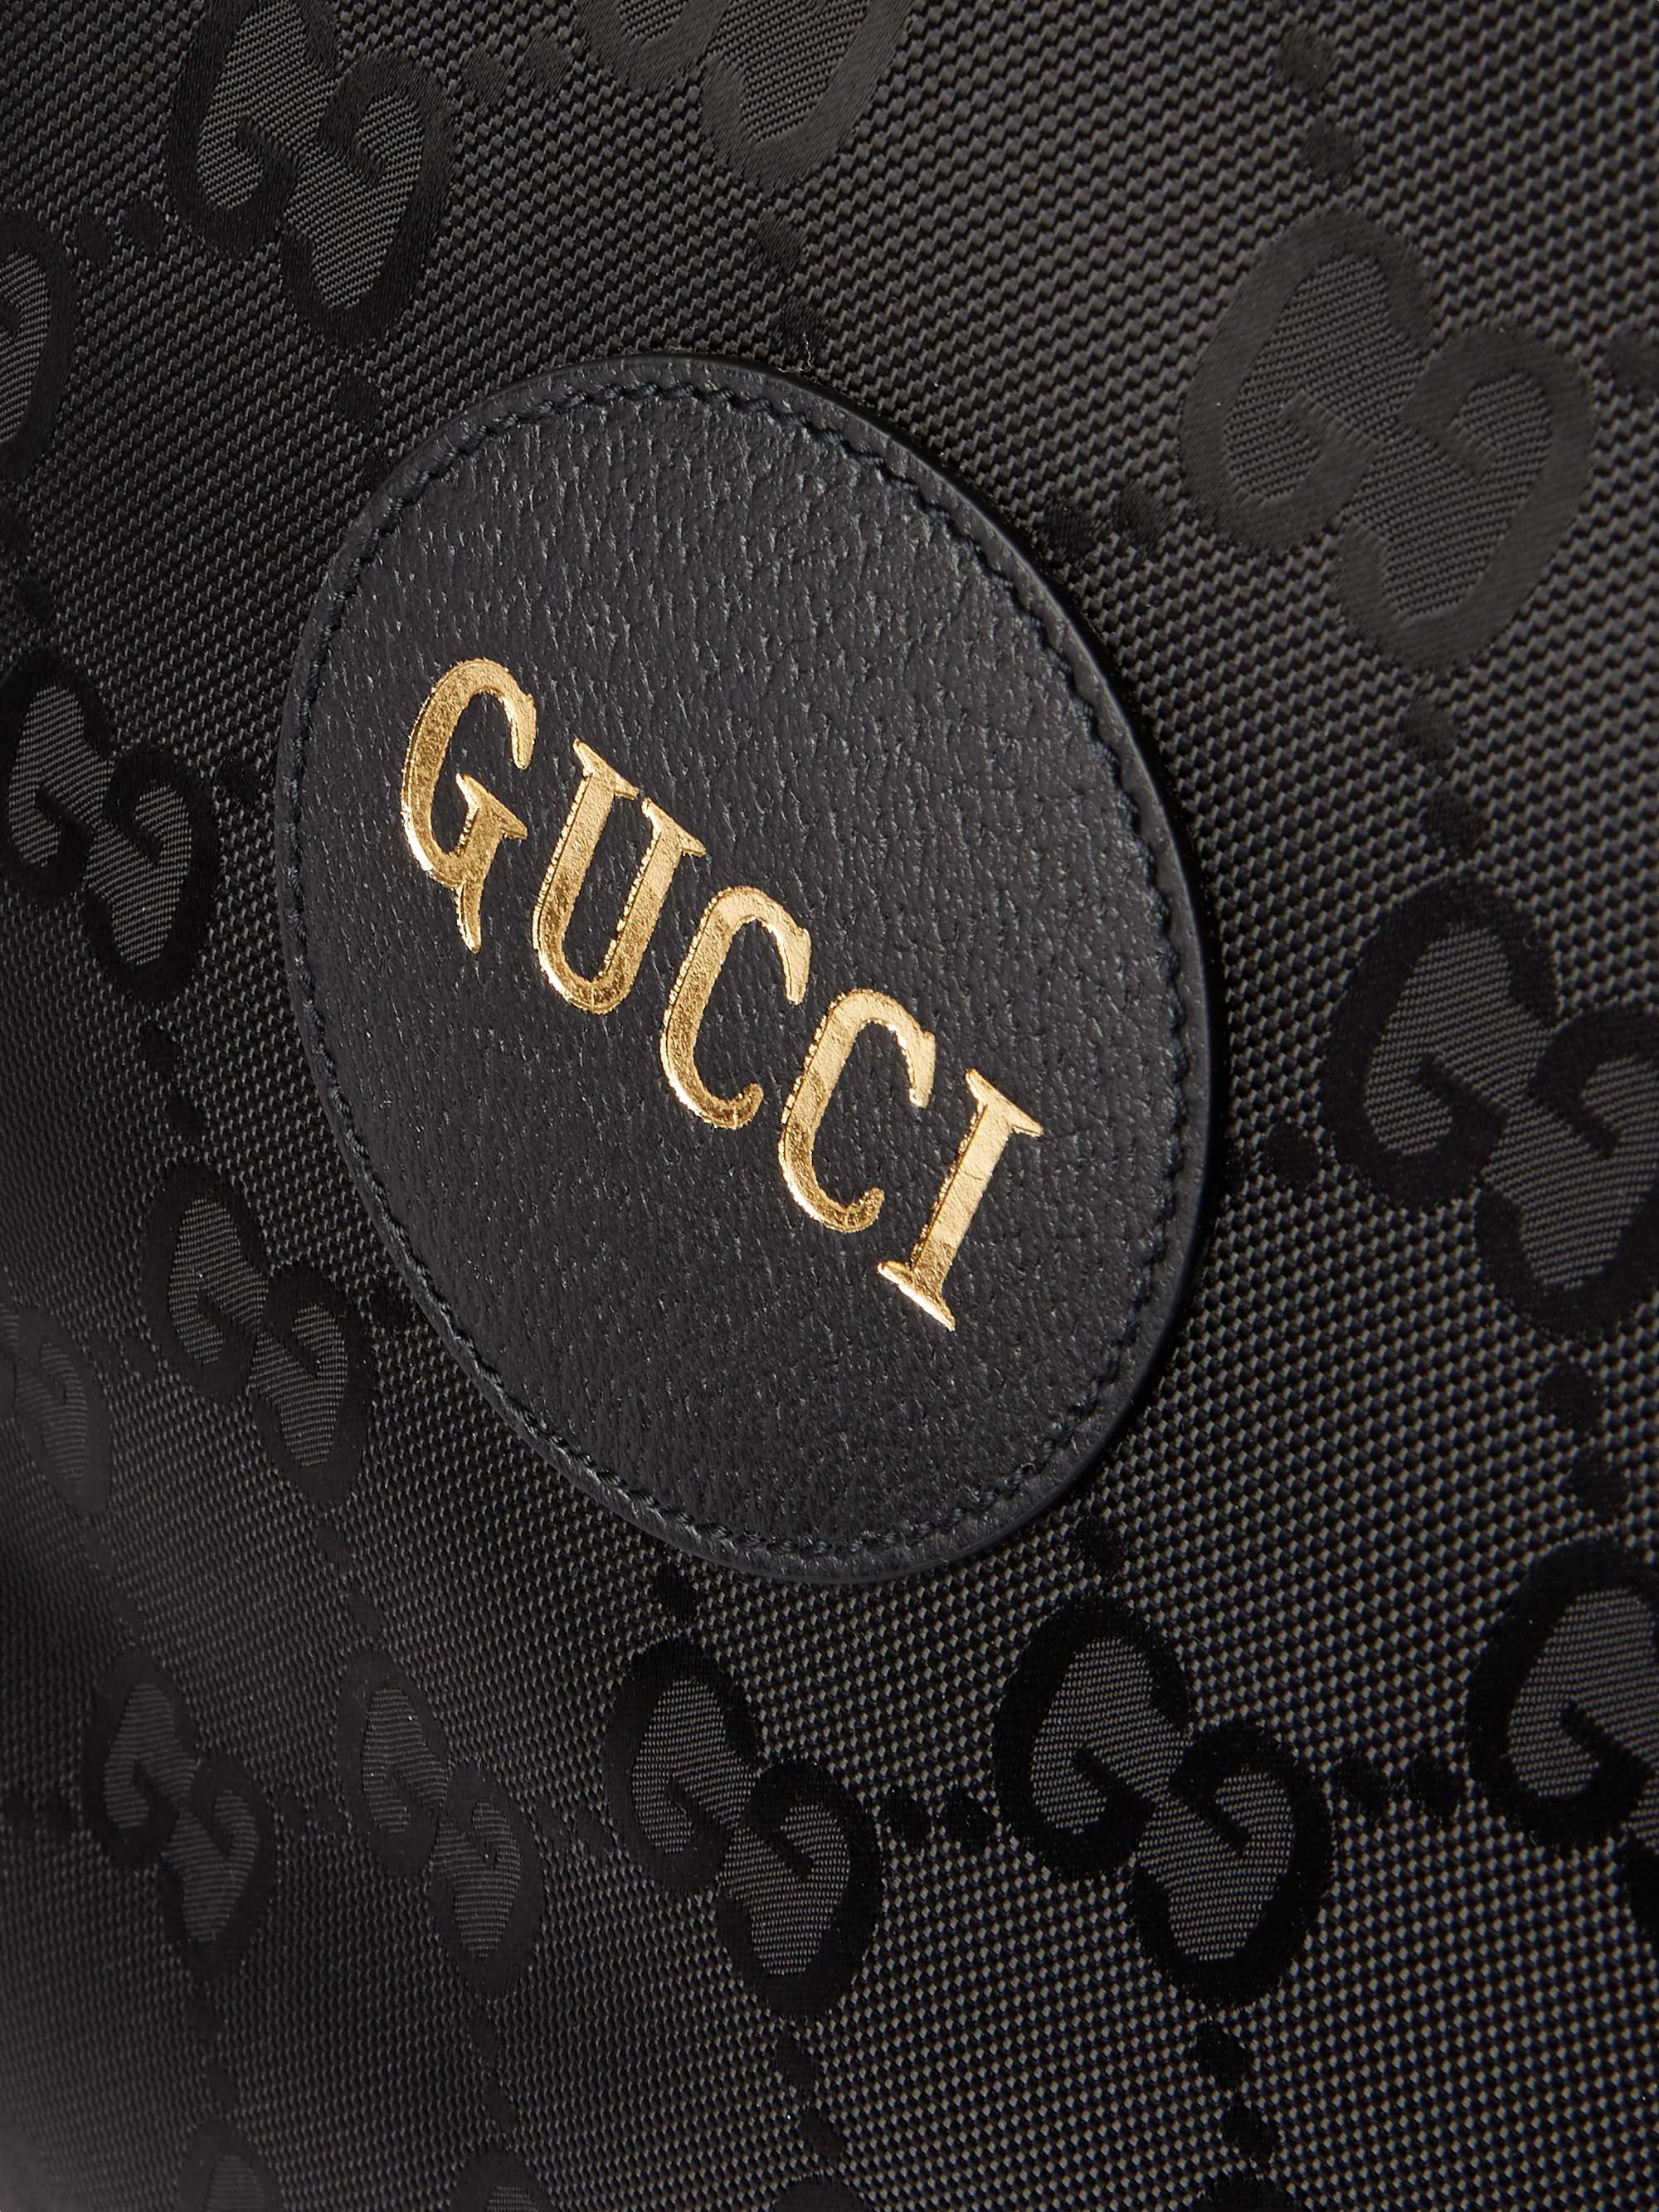 GUCCI Off the Grid Leather-Trimmed Monogrammed ECONYL Canvas Tote Bag